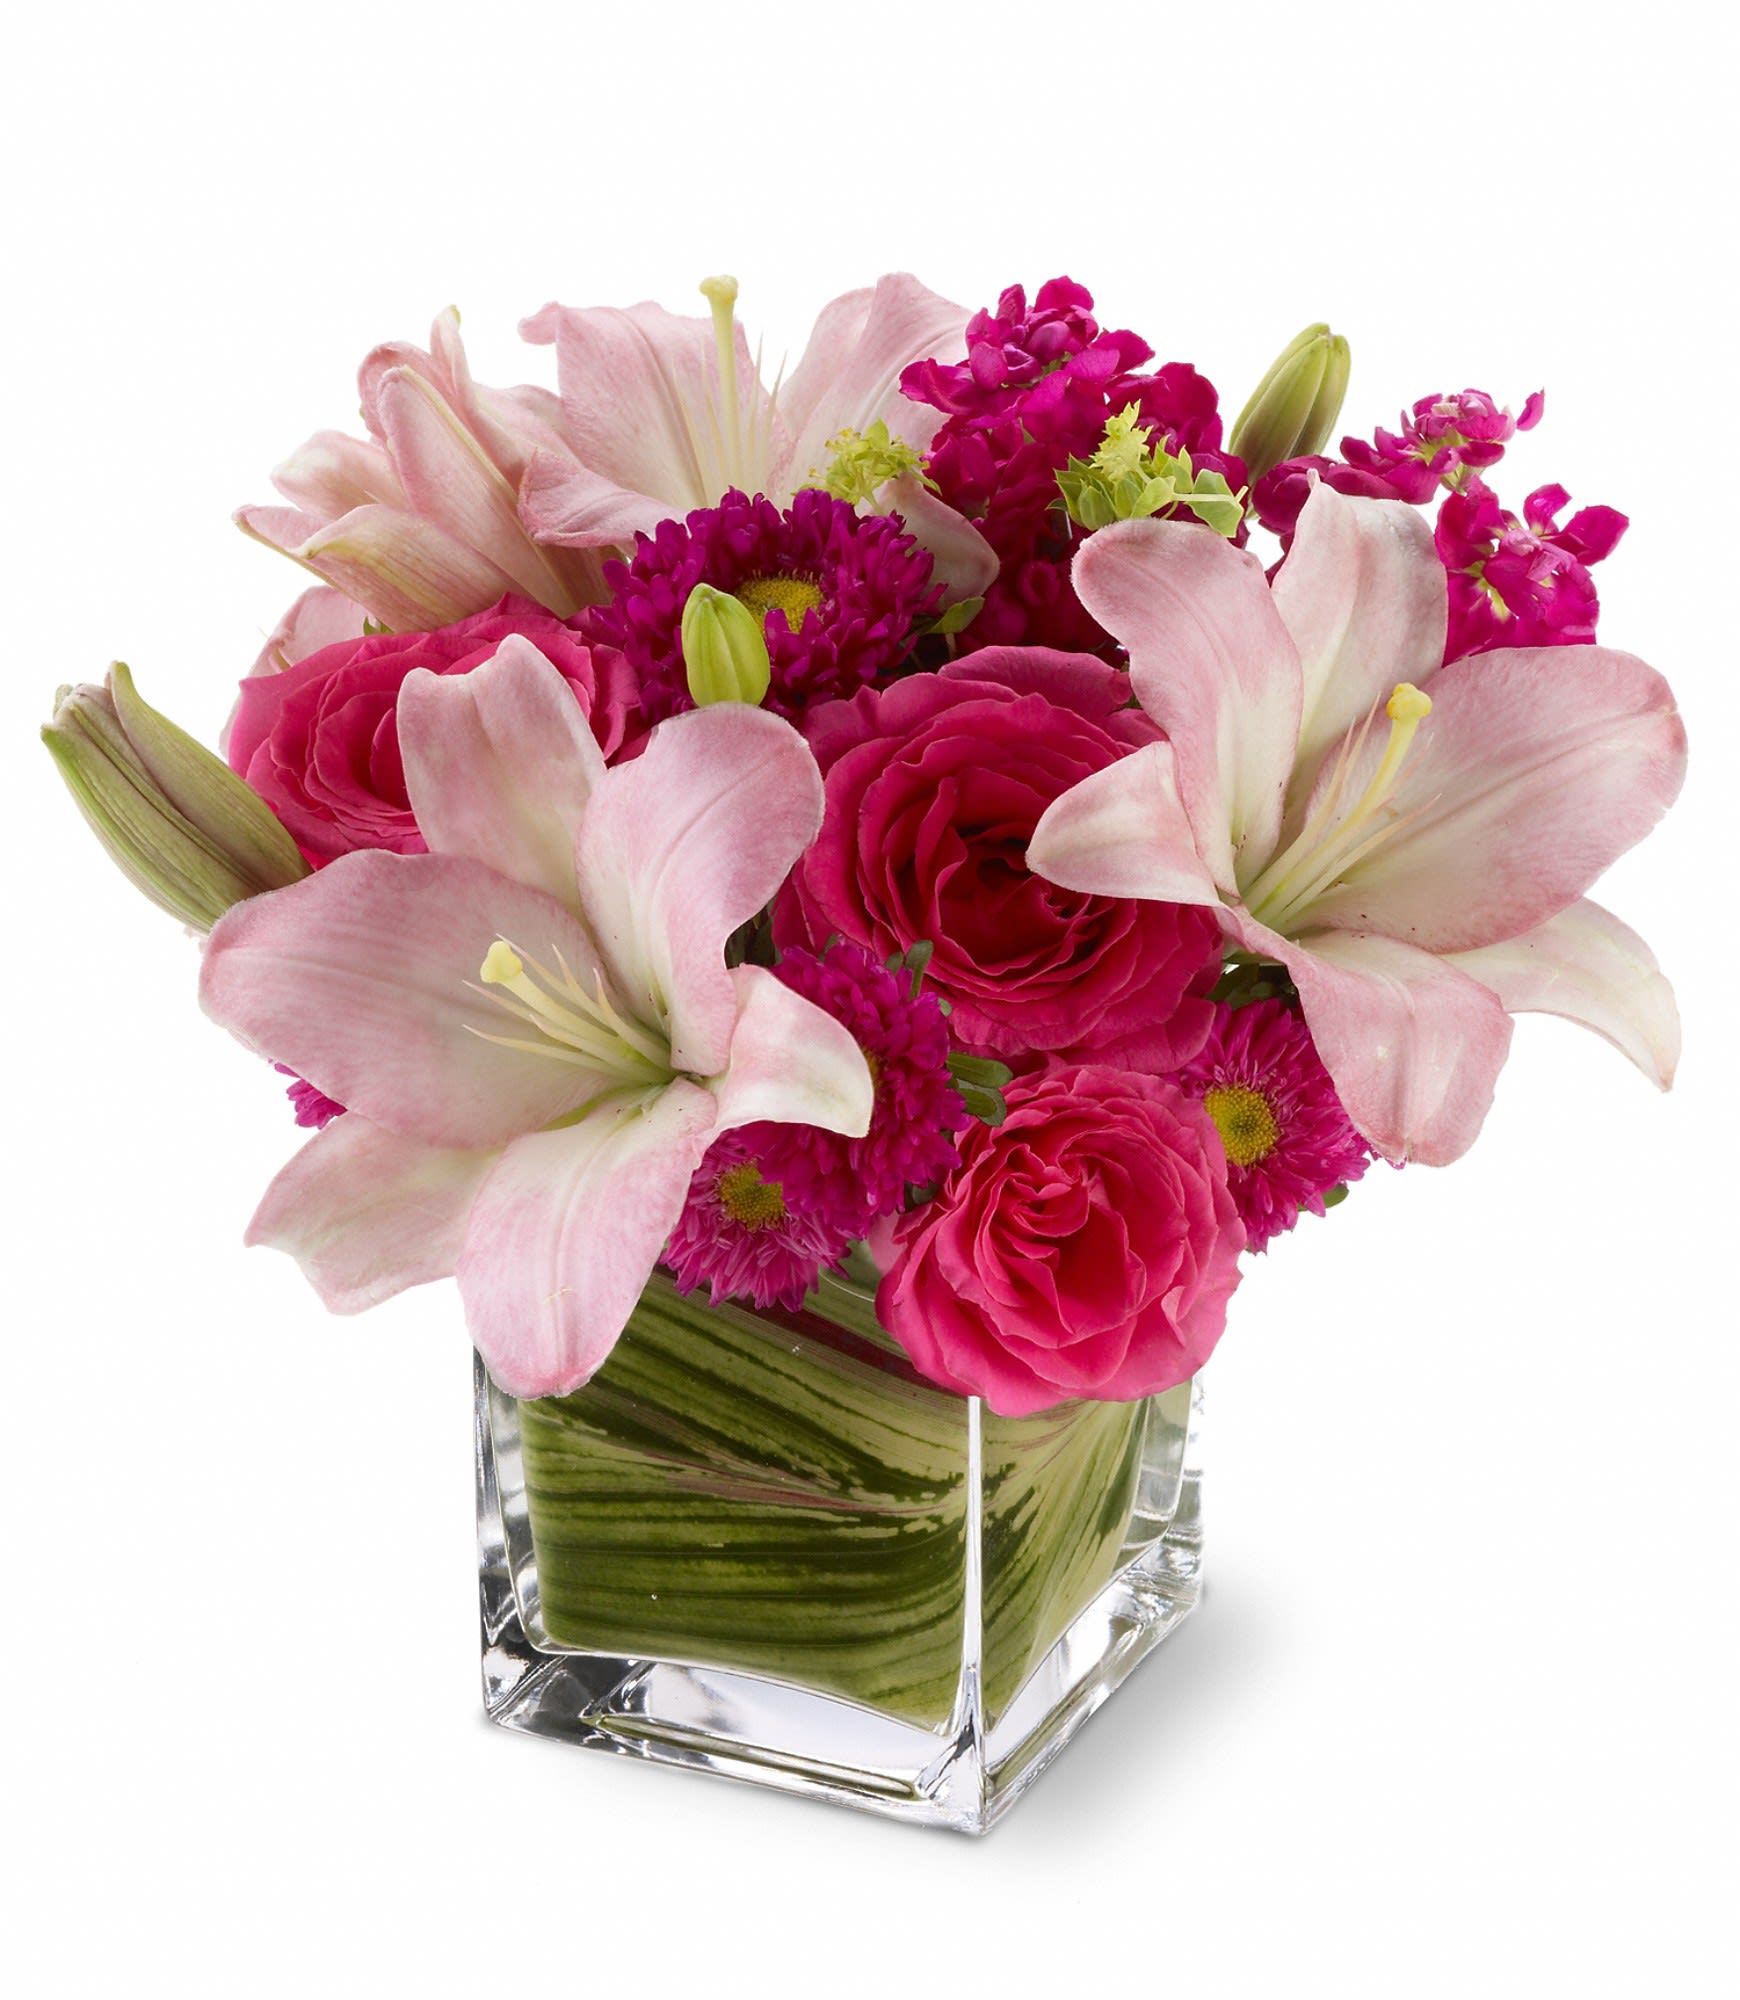 Teleflora's Posh Pinks - Show impeccable taste when you send this stylish bouquet of hot pink roses, pale pink lilies and mixed blossoms, arranged in a modern glass cube vase. Pretty, posh and perfectly high-class!    Hot pink roses and Matsumoto asters, pink LA hybrid lilies and burgundy stock arrive in a clear glass Teleflora cube vase lined with variegated ti leaves.    Approximately 11.5 &quot; (W) x 11&quot; (H)    Orientation: All-Around    As Shown : TFWEB147